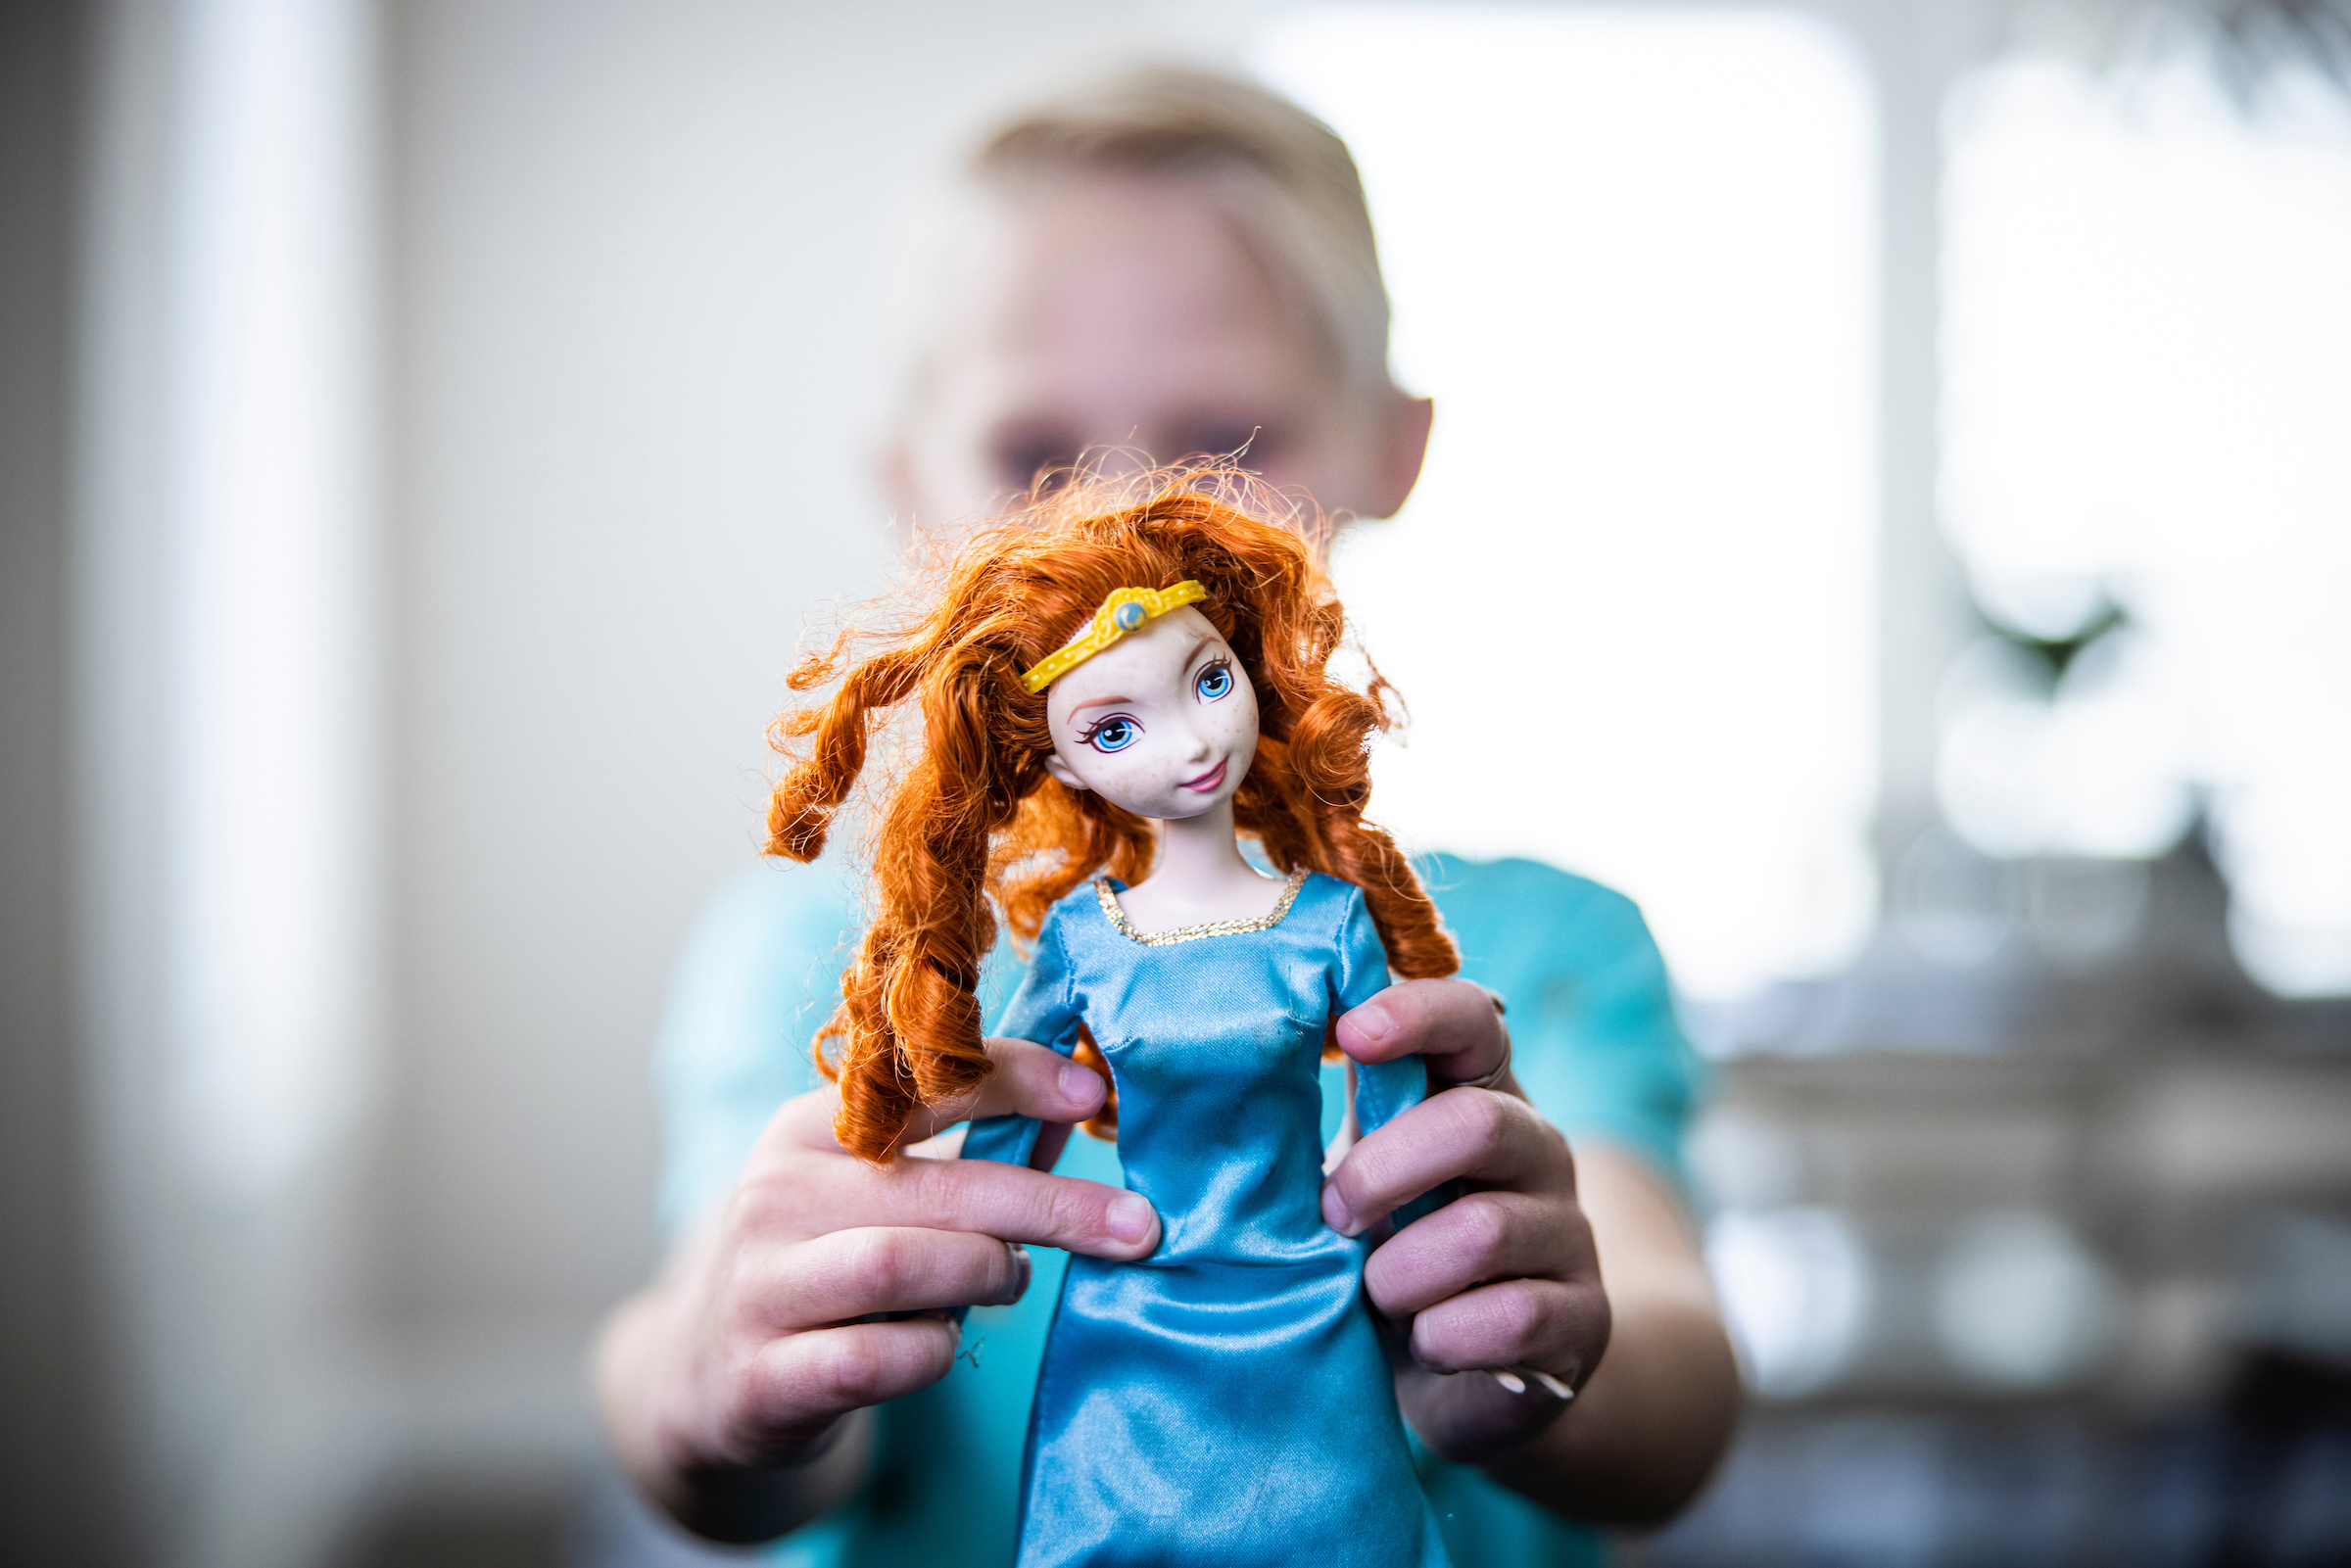 Research from BYU indicates that engagement with princess culture has a positive impact